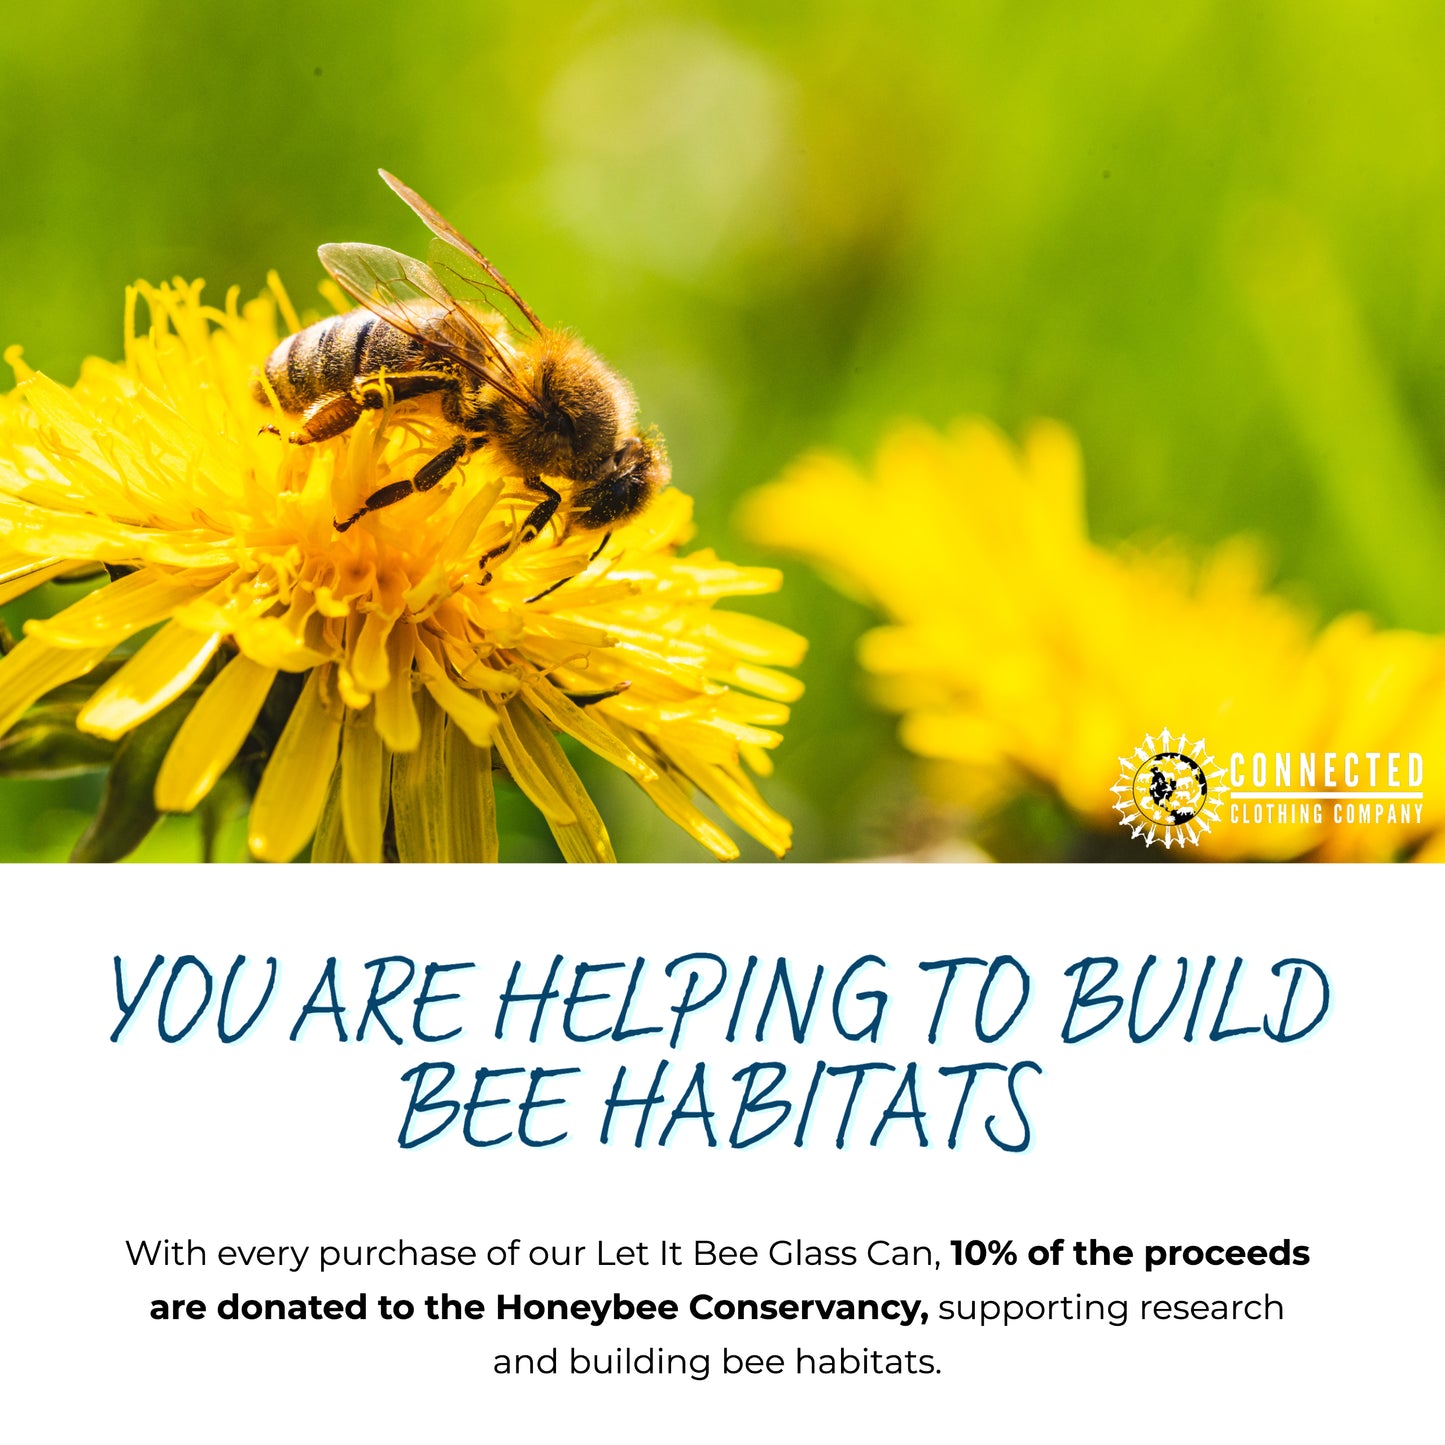 Let it bee glass can - connected clothing company - 10% of proceeds donated to honeybee conservation